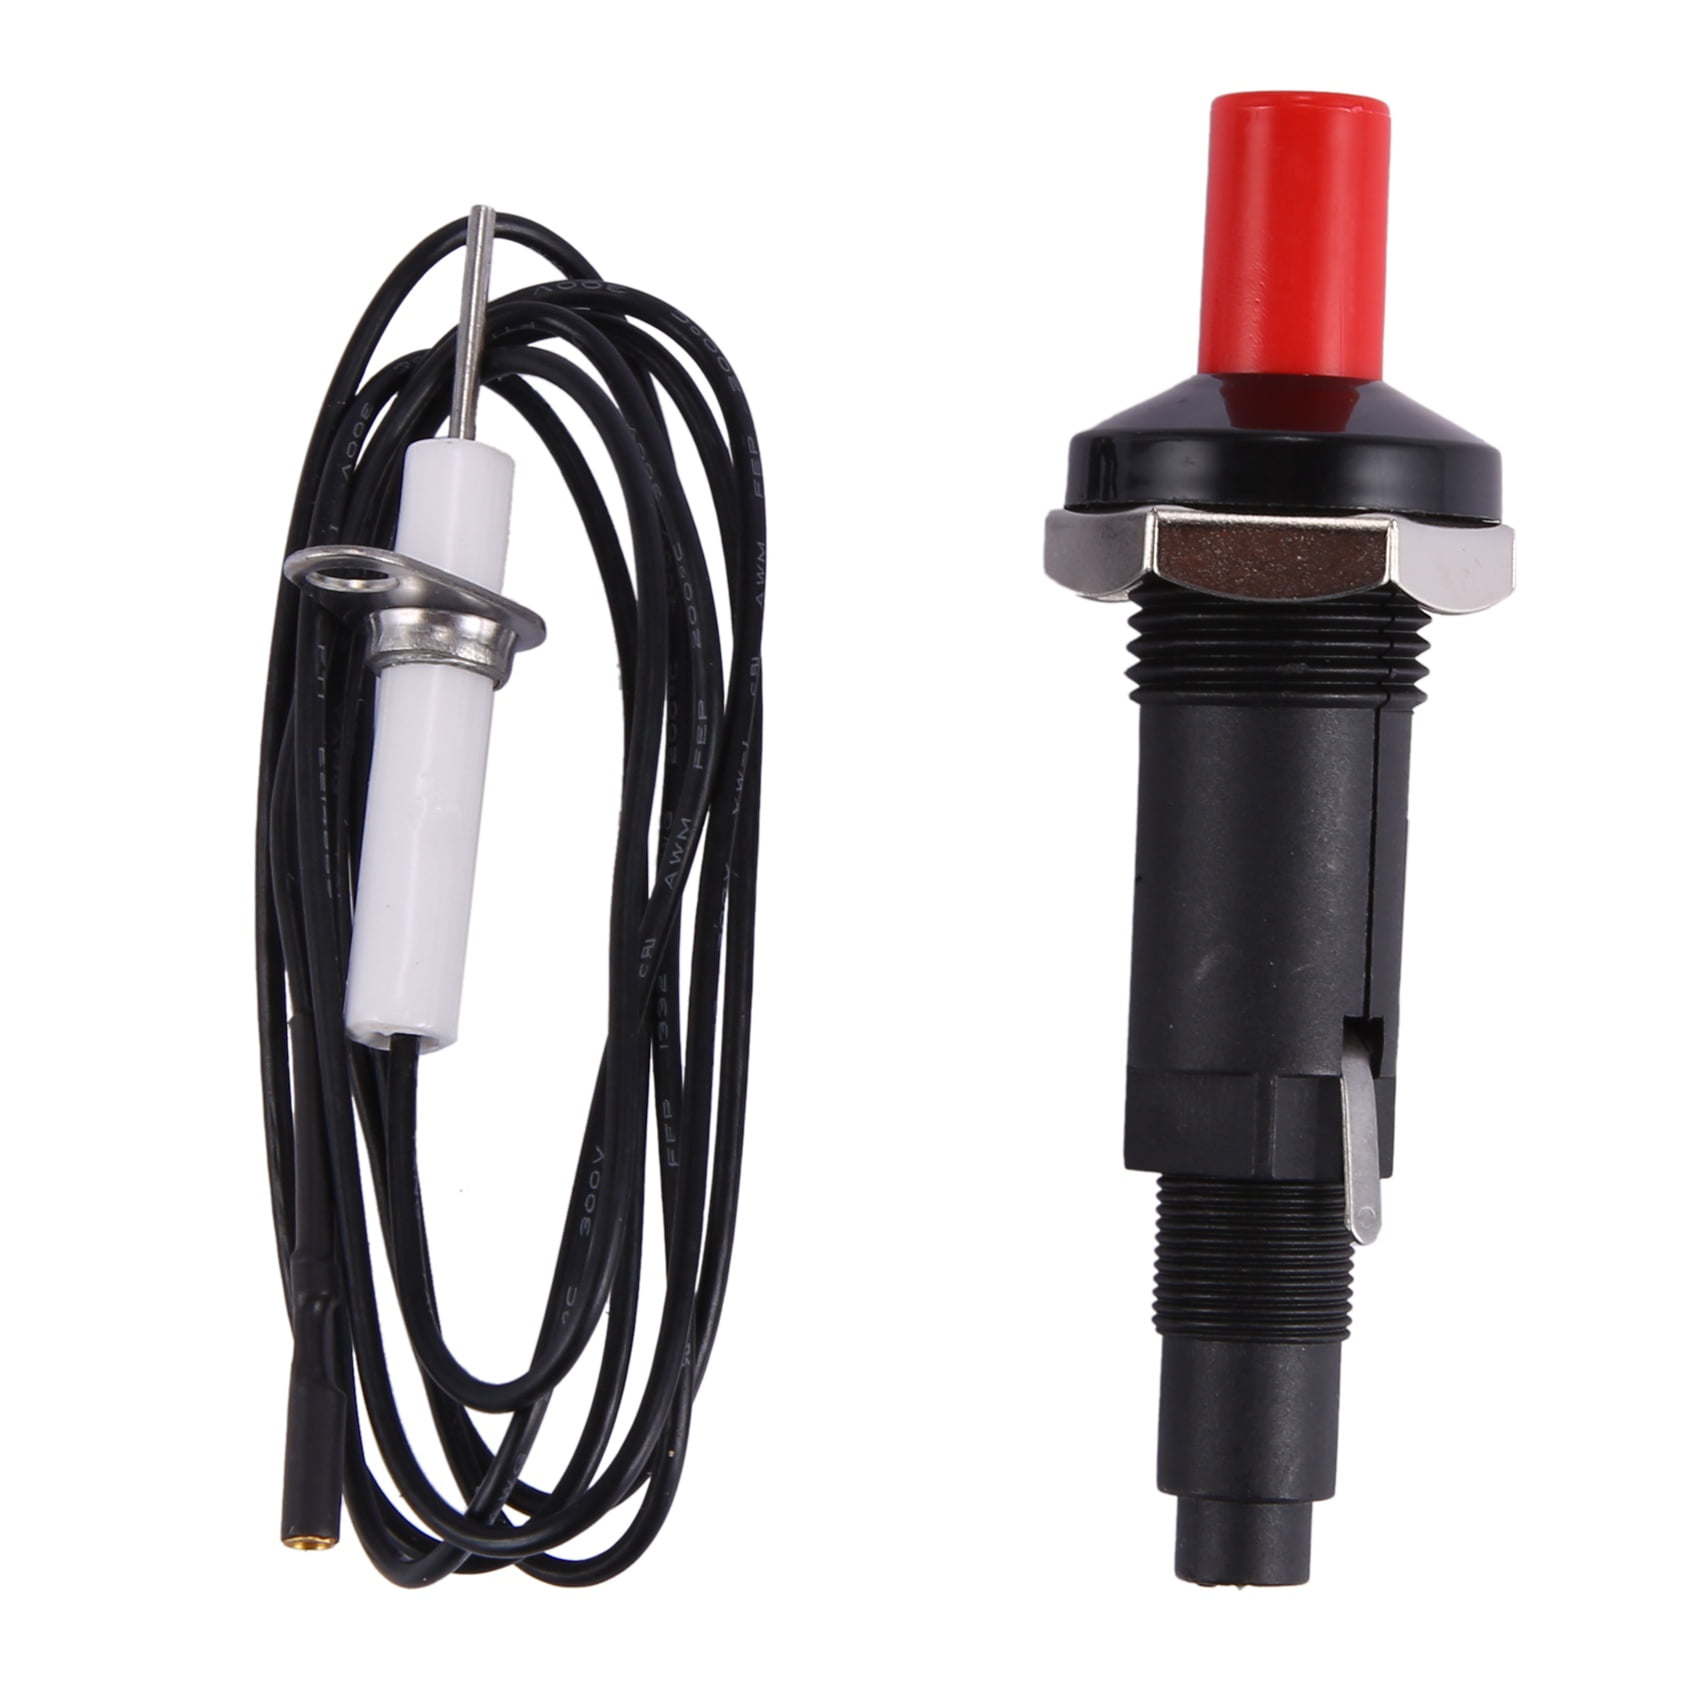 Piezo Spark Ignition Set With Cable 1000mm Push Button Igniter Kitchen  x.